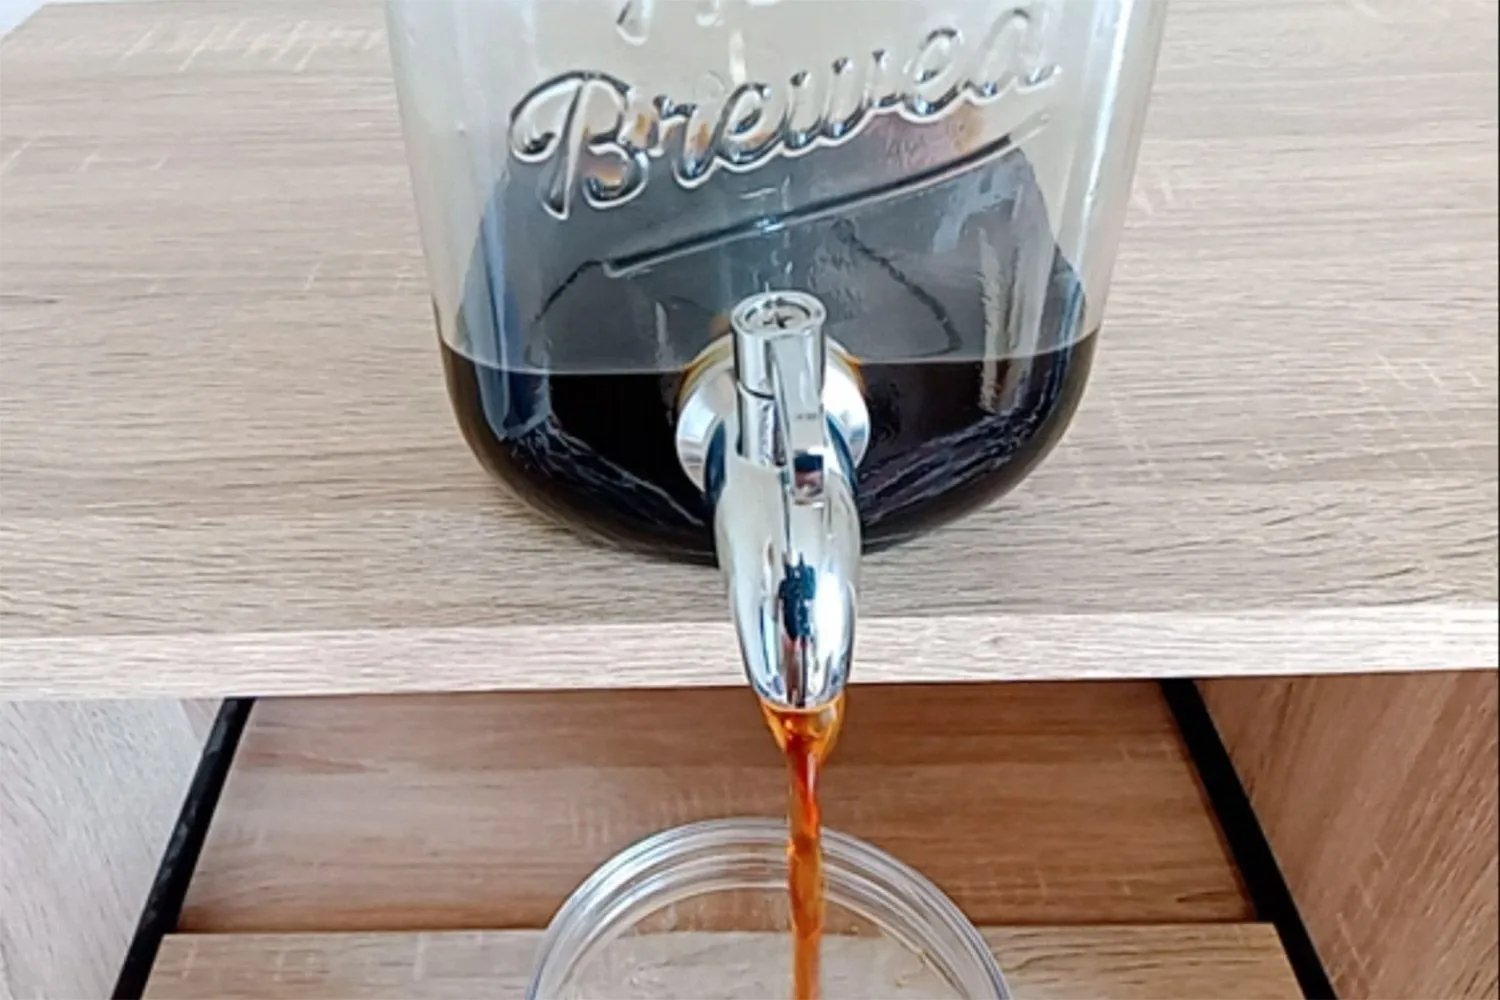 Cold Brew on Tap - Unique Cold Brew Coffee Maker by Willow